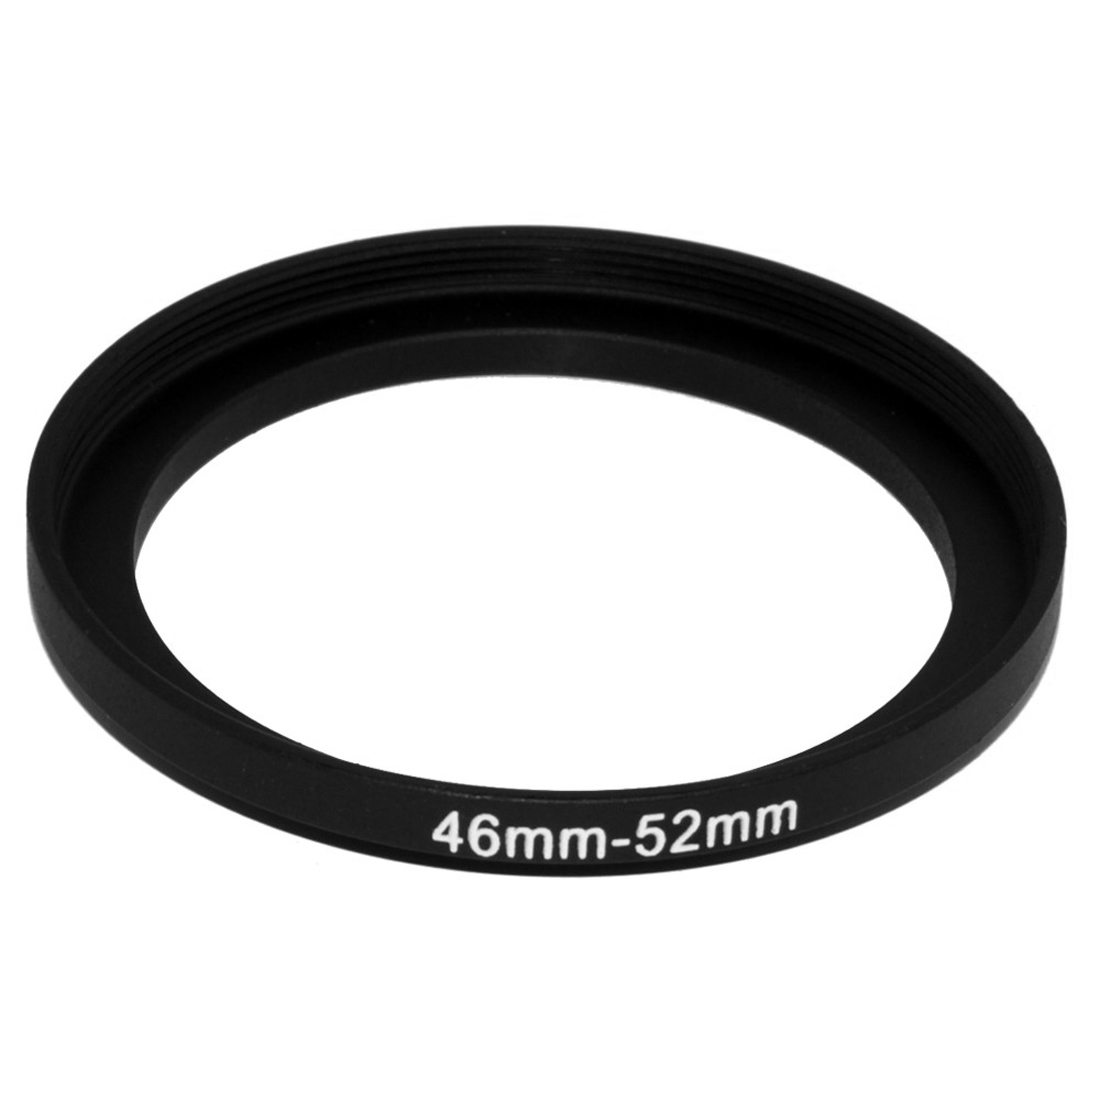 Step-up ring 46-52 mm